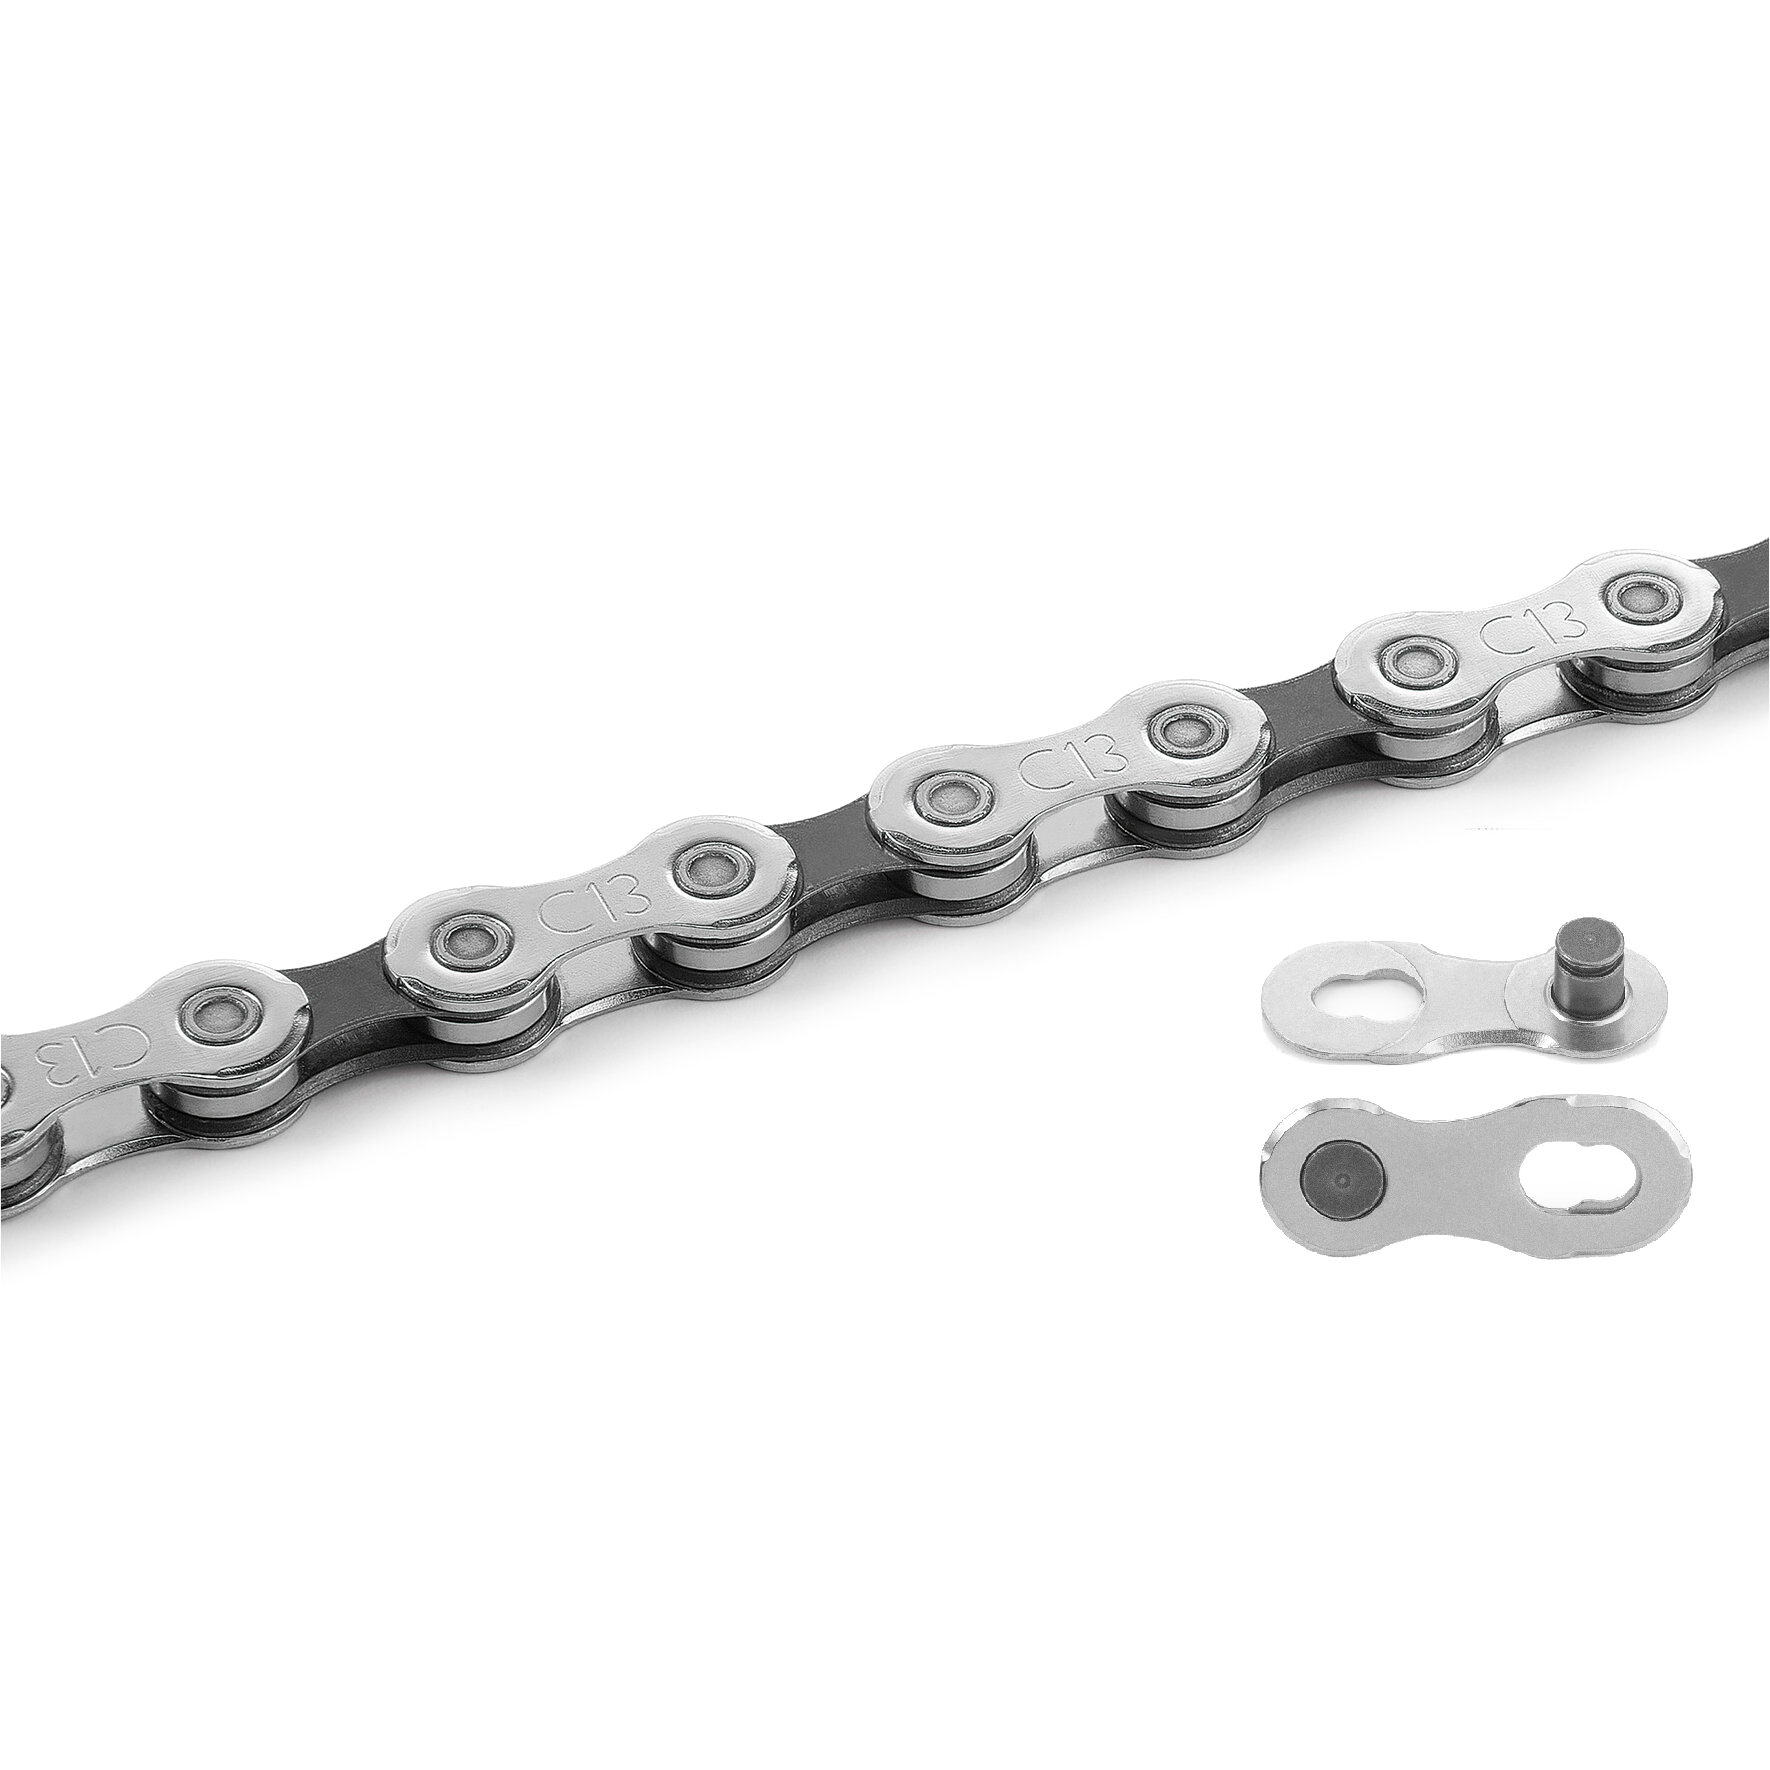 Picture of Campagnolo Ekar GT Chain - 13-speed - 123 Links | C-Link